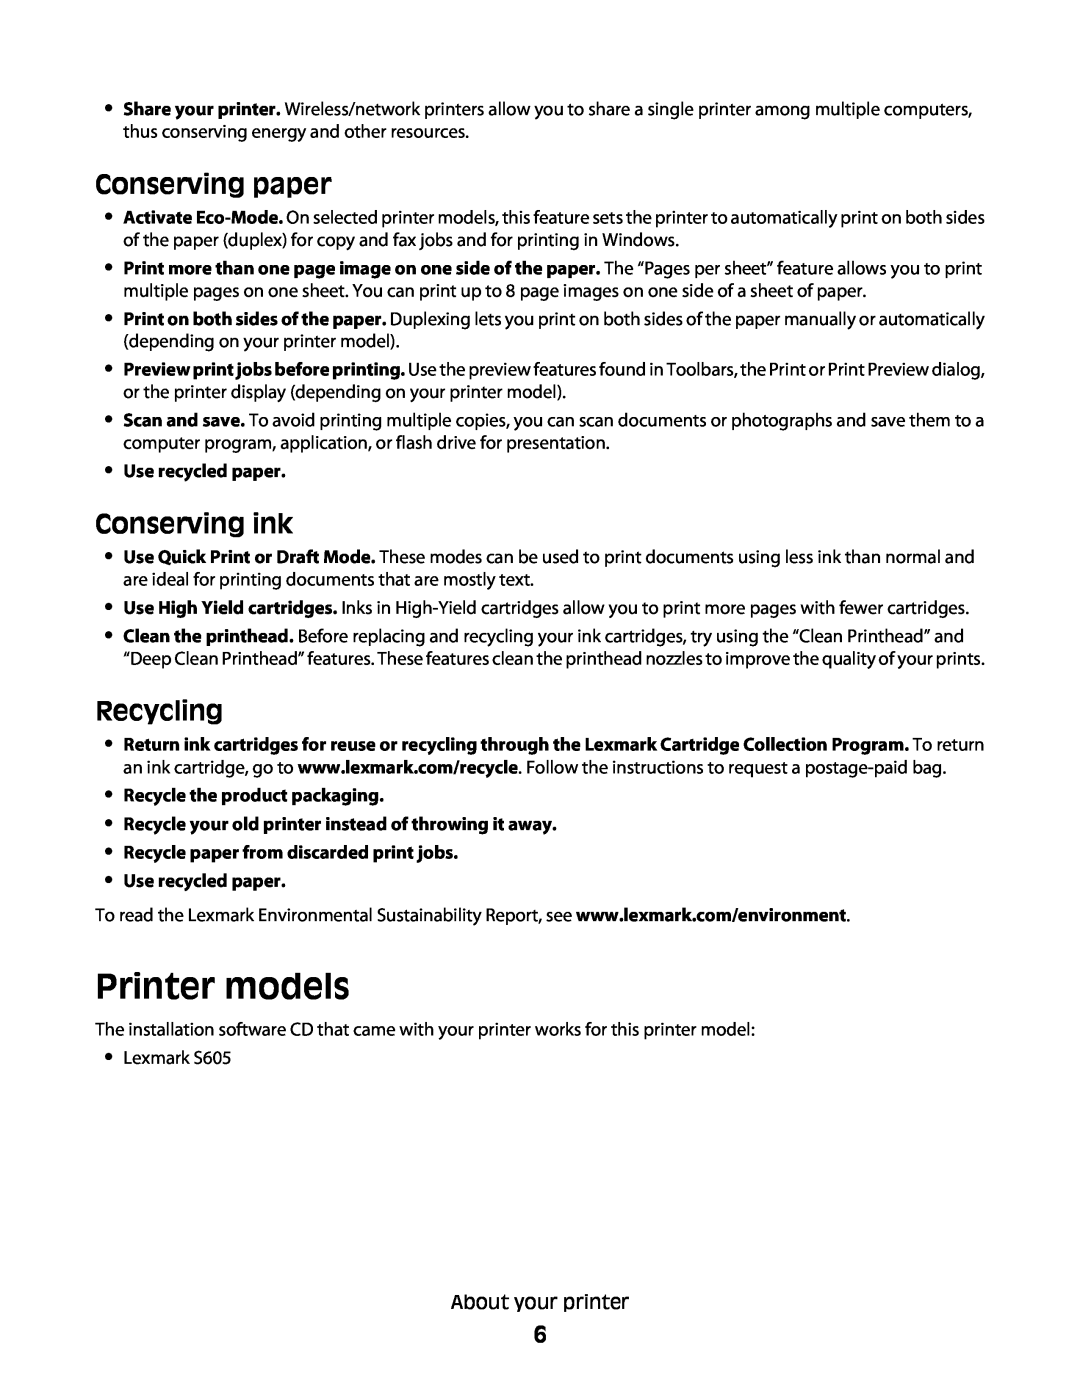 Lexmark S600 manual Printer models, Conserving paper, Conserving ink, Recycling, Use recycled paper 